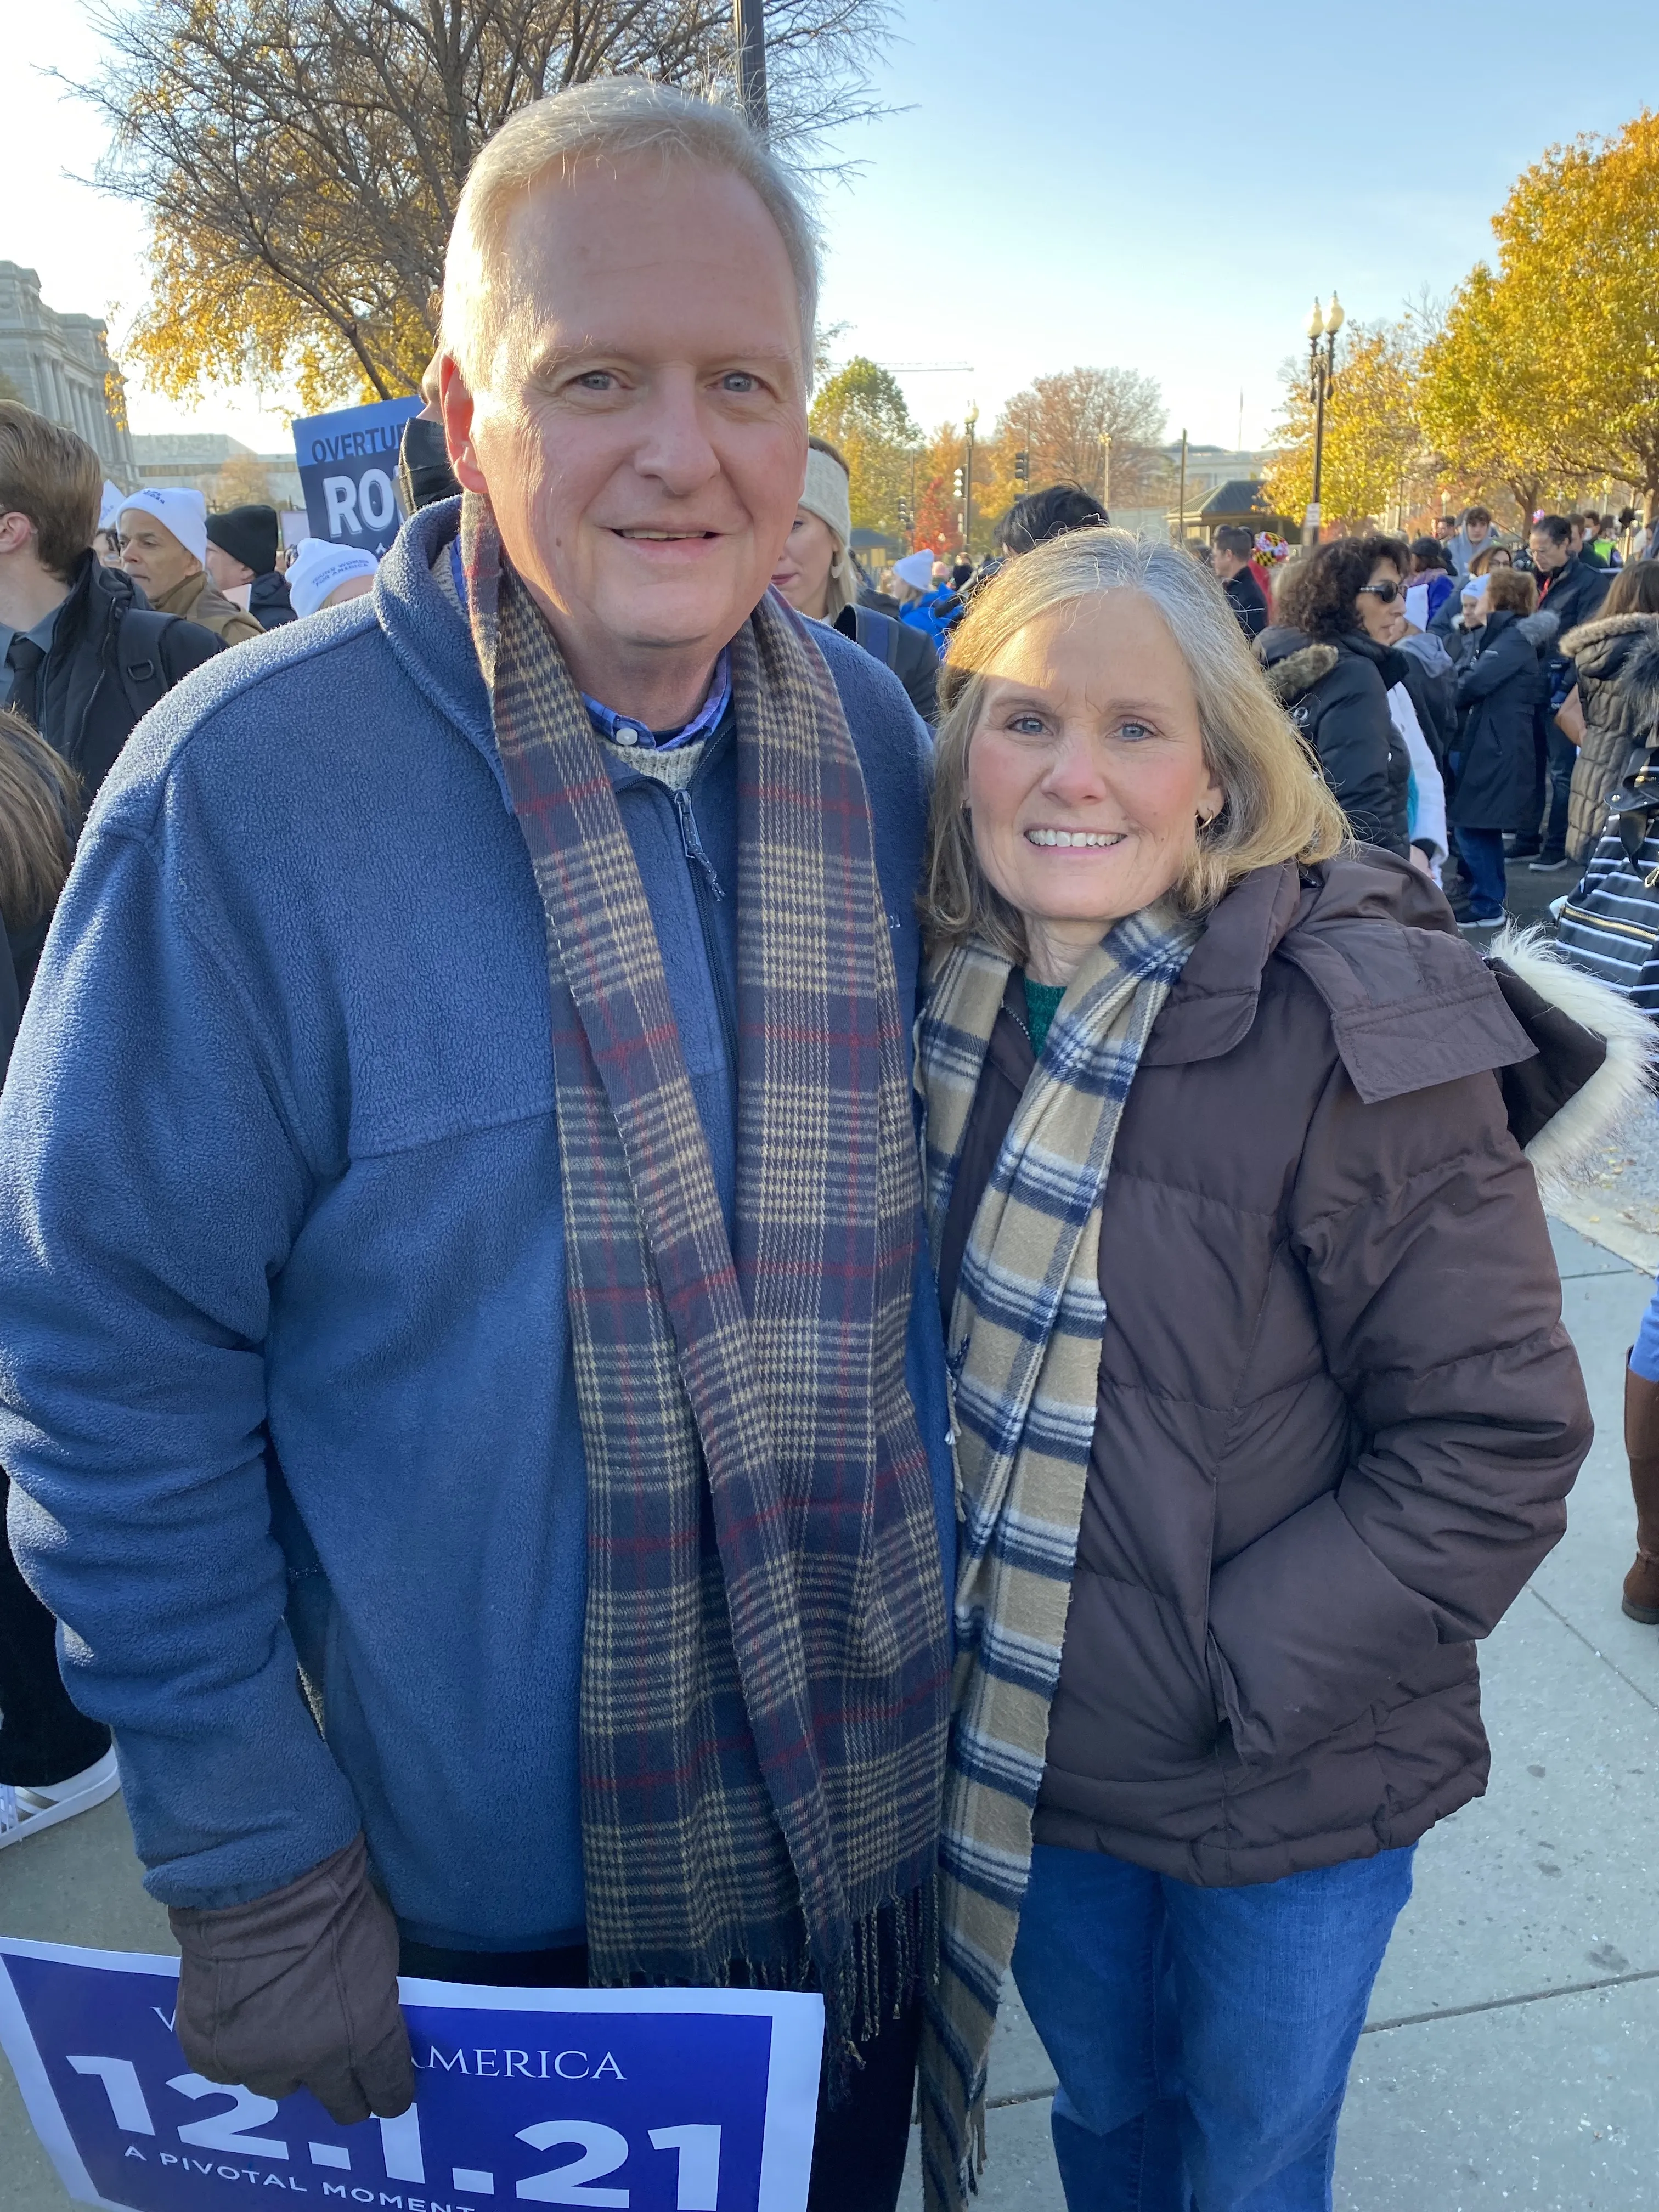 Ann and Jimmy Aycock from Birmingham, Alabama, were among the pro-life demonstrators outside the U.S. Supreme Court on Dec. 1, 2021. Katie Yoder/CNA